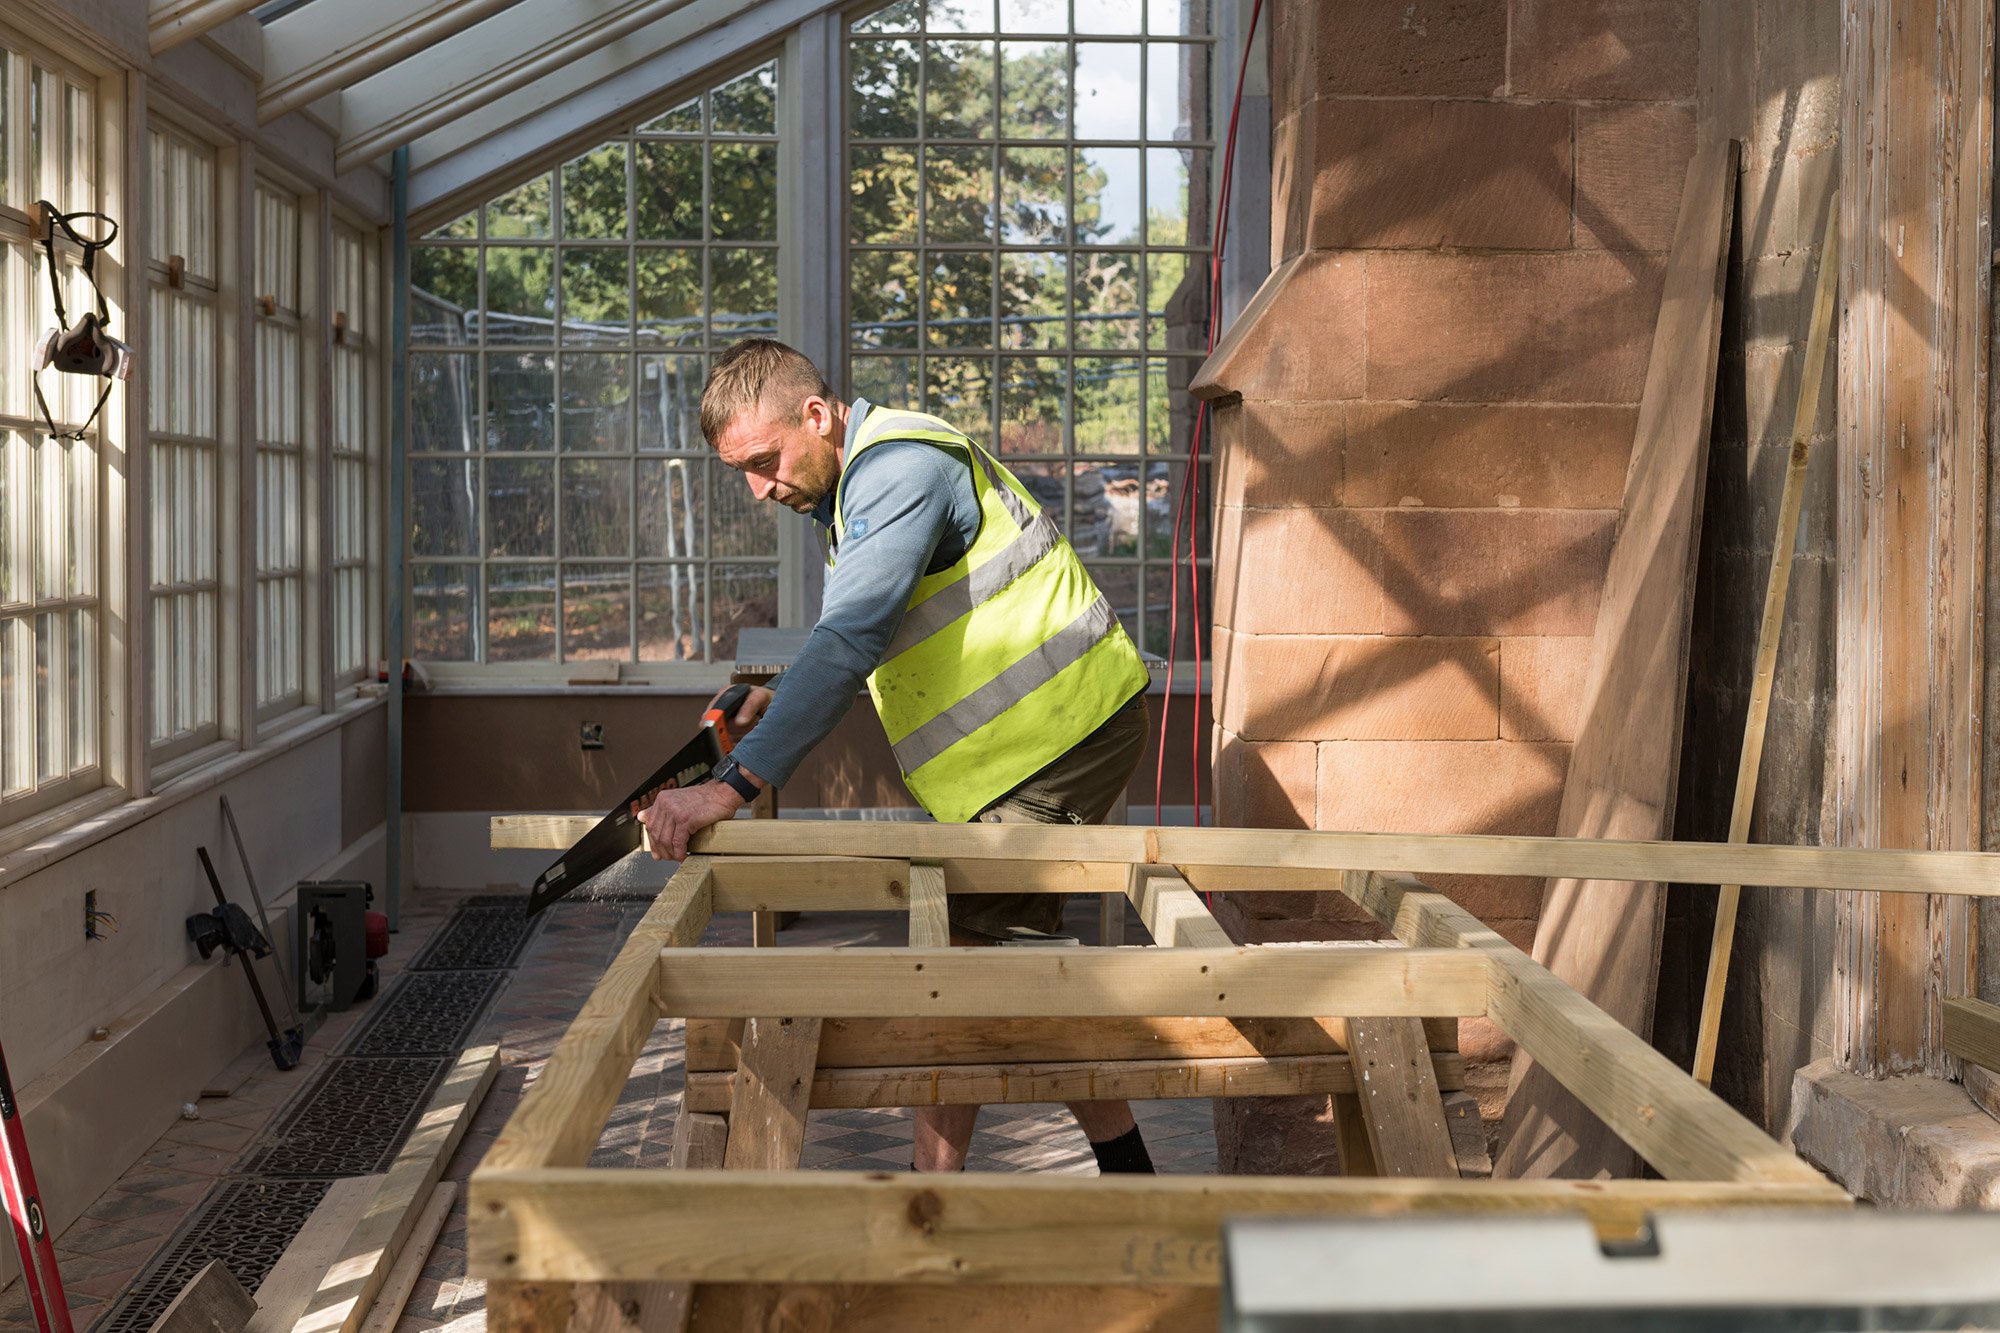 Man in a conservatory undergoing renovation. He is wearing a high-vis waistcoat and sawing a length of wood balanced on a frame made from the same wood.